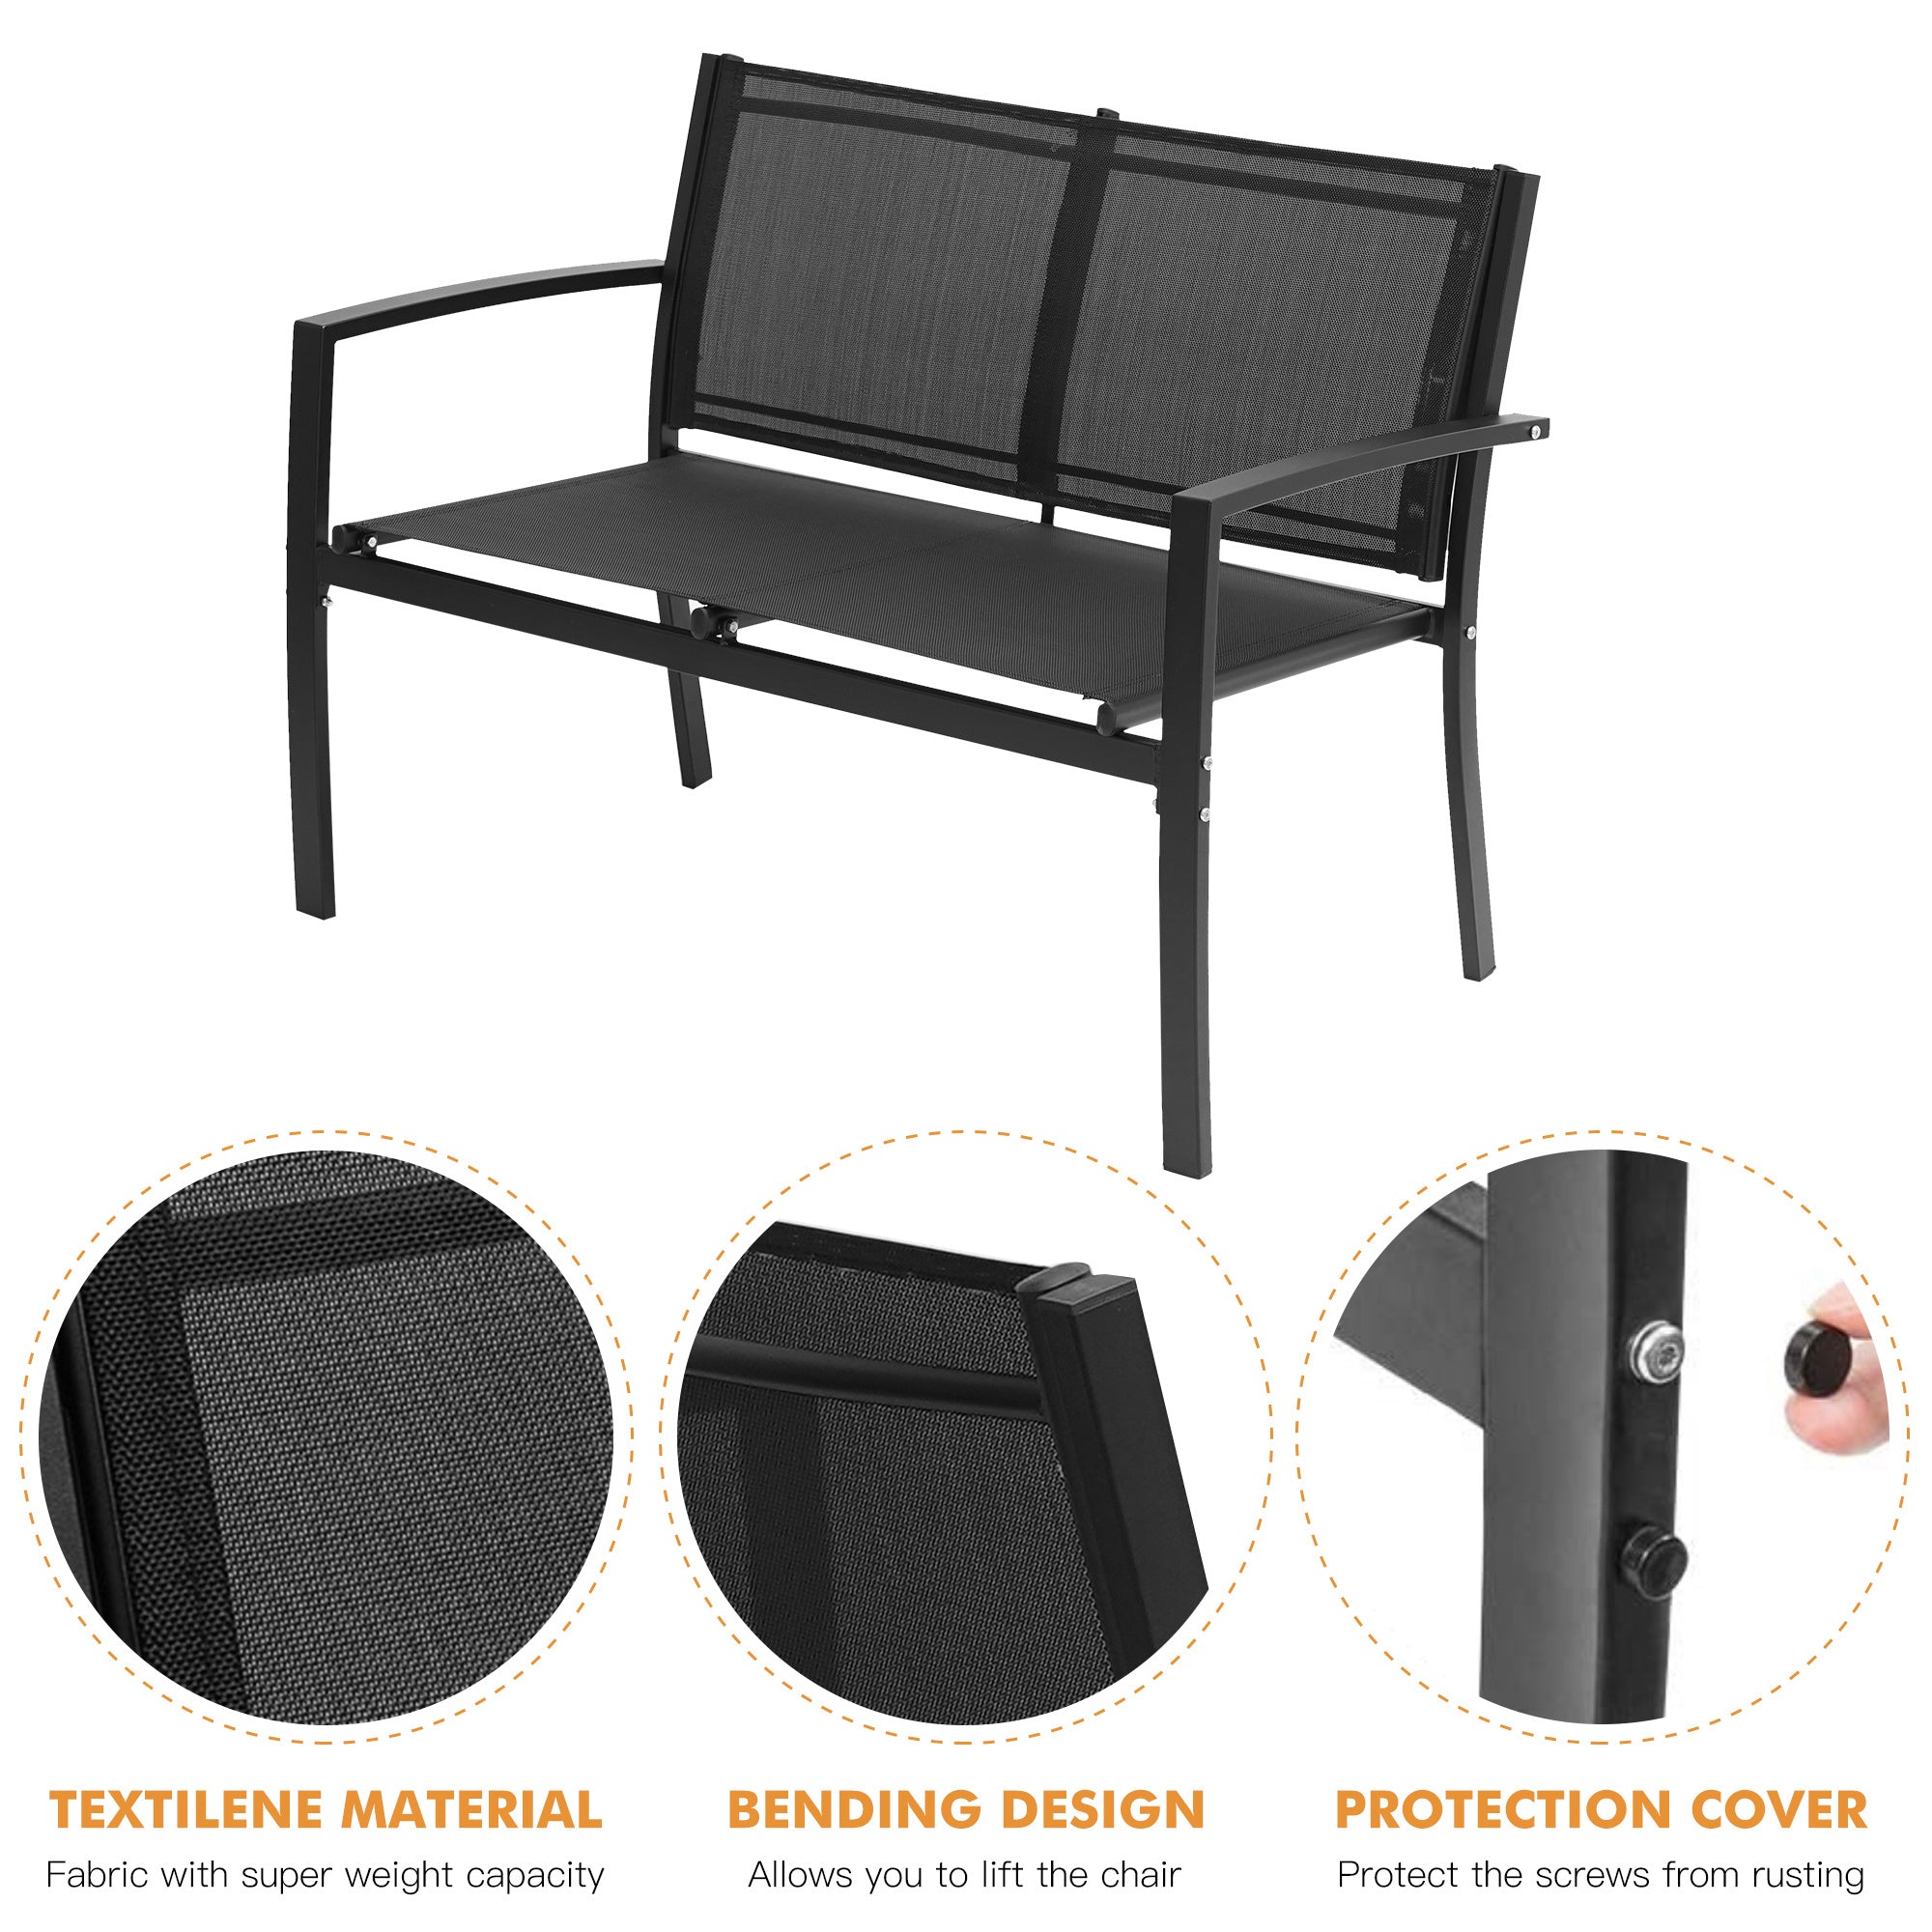 A 4 Pieces Patio Furniture Set Outdoor Garden Patio Conversation Sets Poolside Lawn Chairs with Glass Coffee Table Porch Furniture (Black) with a view of the ocean.